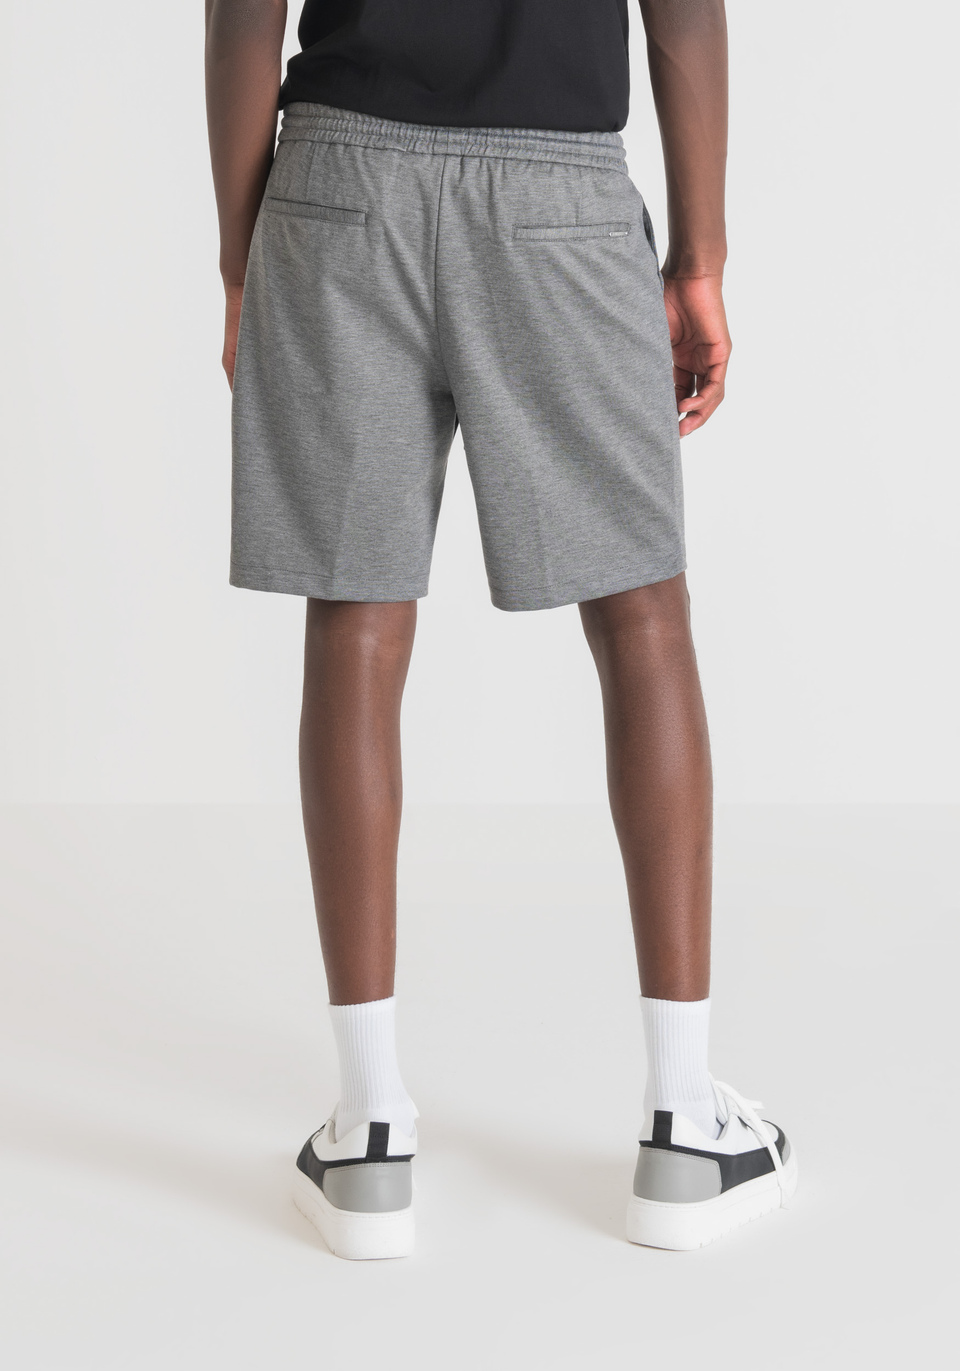 REGULAR FIT SHORTS IN TECHNICAL FABRIC WITH PLEATS - Antony Morato Online Shop